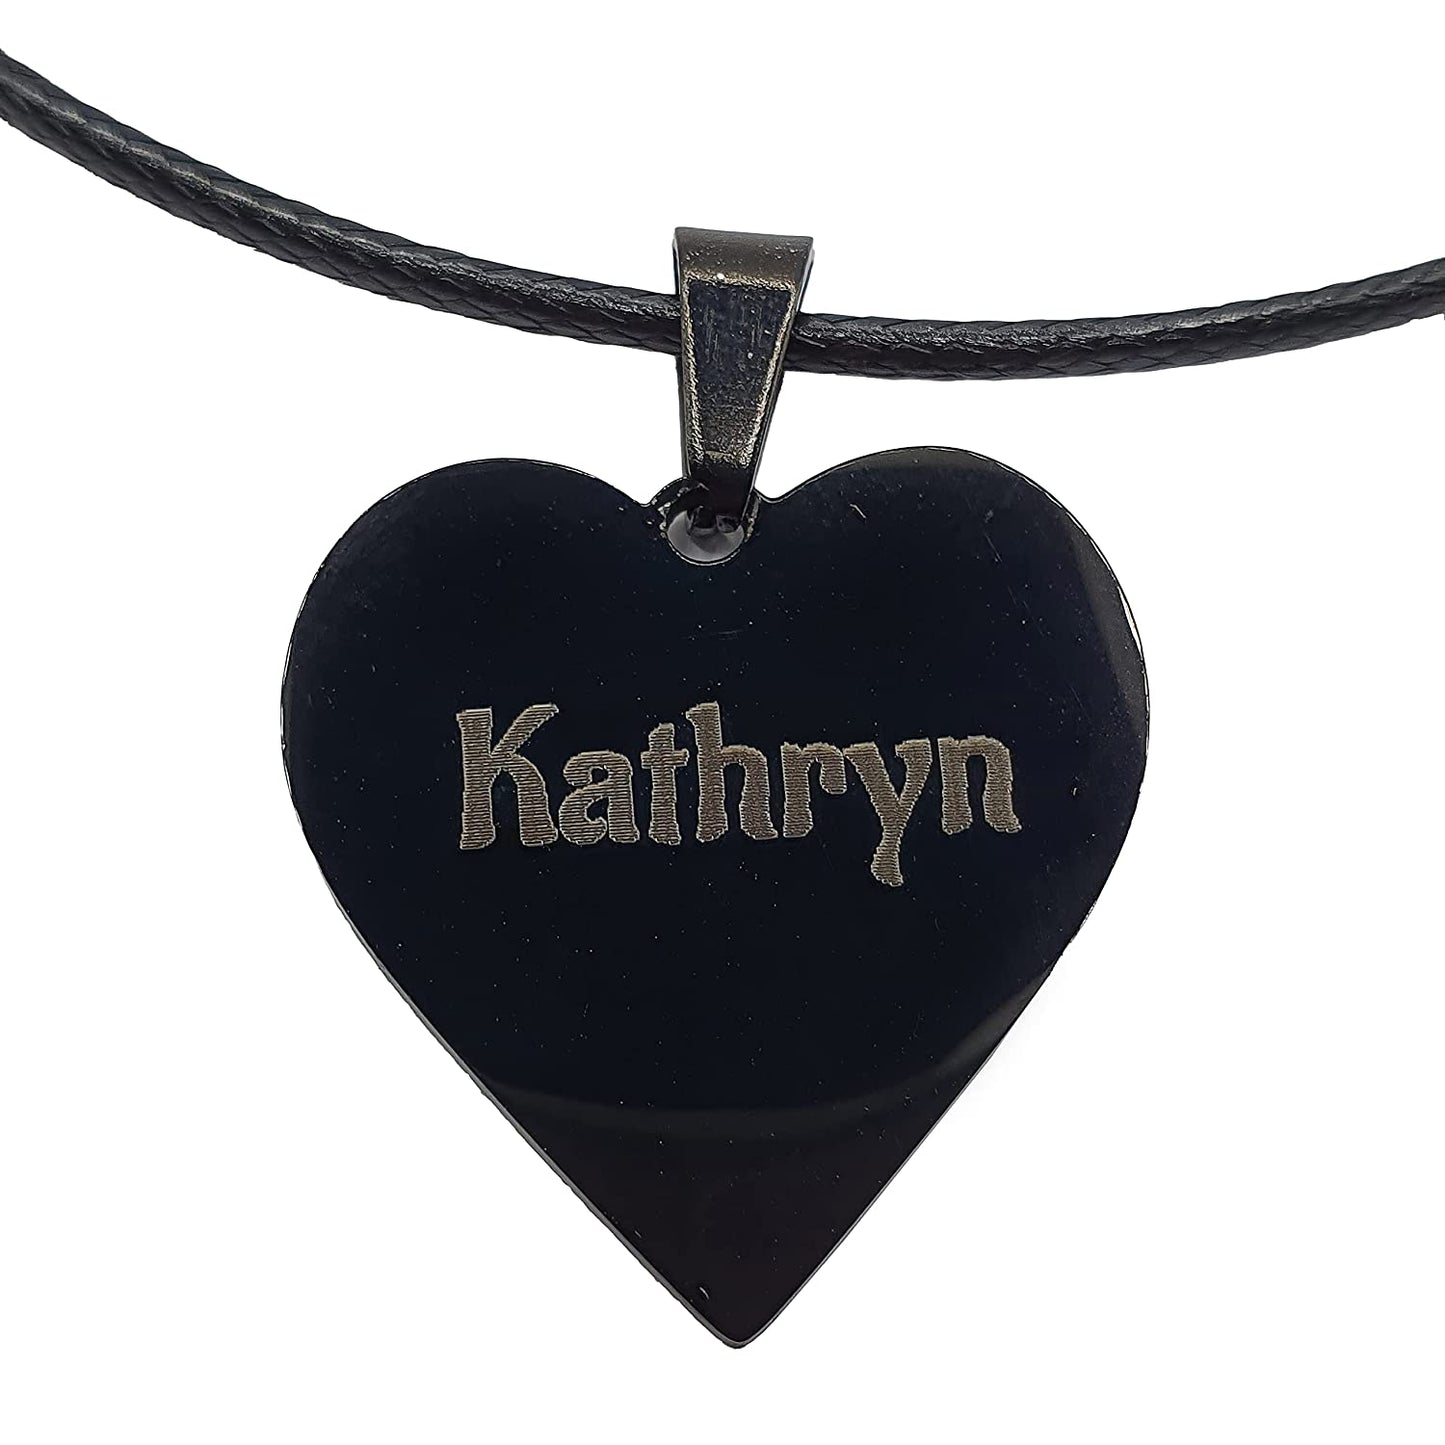 Engraved Black Heart Pendant & Necklace with Gift Bag - Personalise with any name 23mm x 25mm Stainless Steel Jewellery